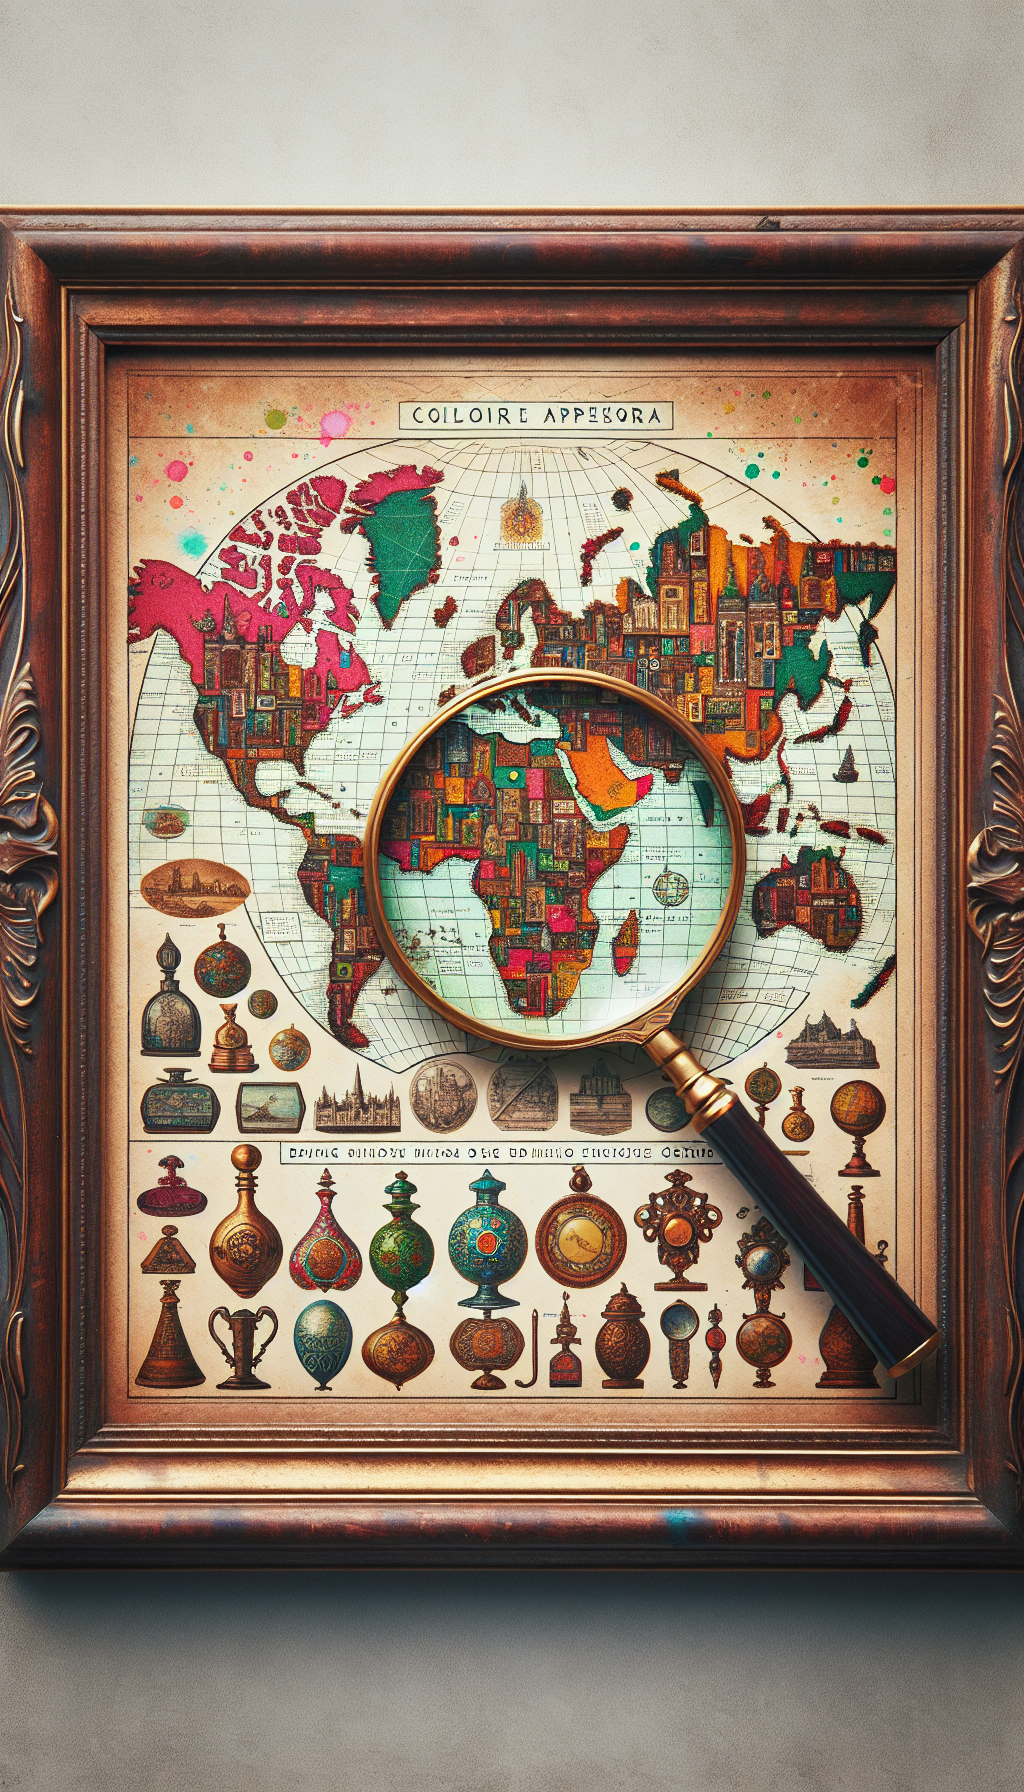 An ornate vintage frame encases a vibrant tapestry map of the world, with iconic historical landmarks and cultural symbols sprouting like treasures across the continents. Overlaying the map, a magnifying glass reveals the shimmering, heightened glow of select antiques, emphasizing their origins and unique value, while soft watercolor splashes hint at the passage of history.